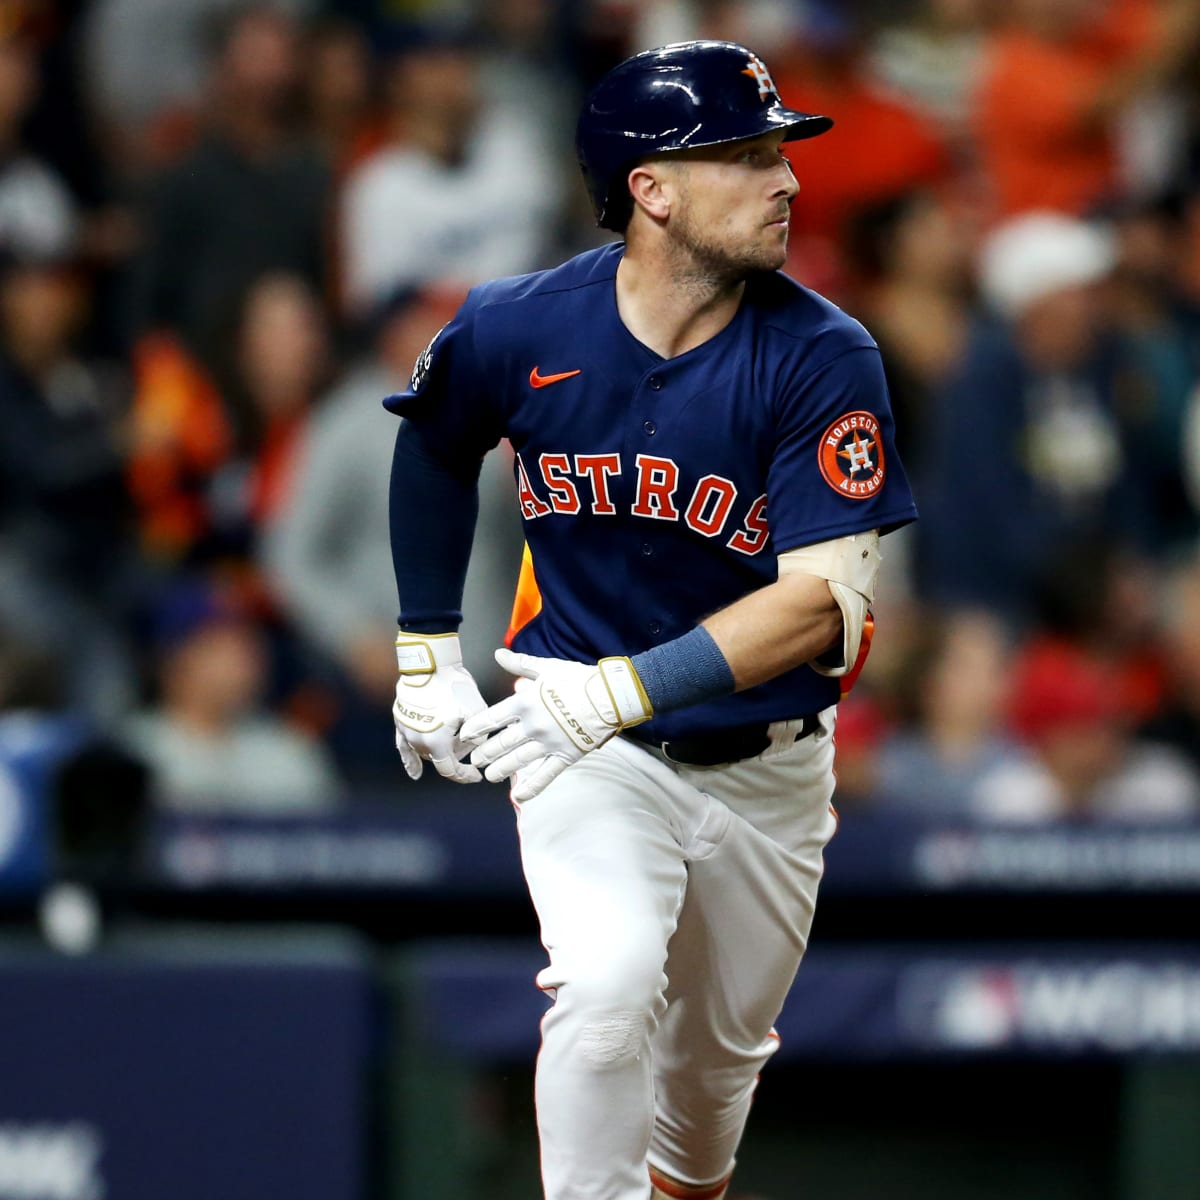 Alexander: Be afraid of these Astros, Dodger fans, be very afraid